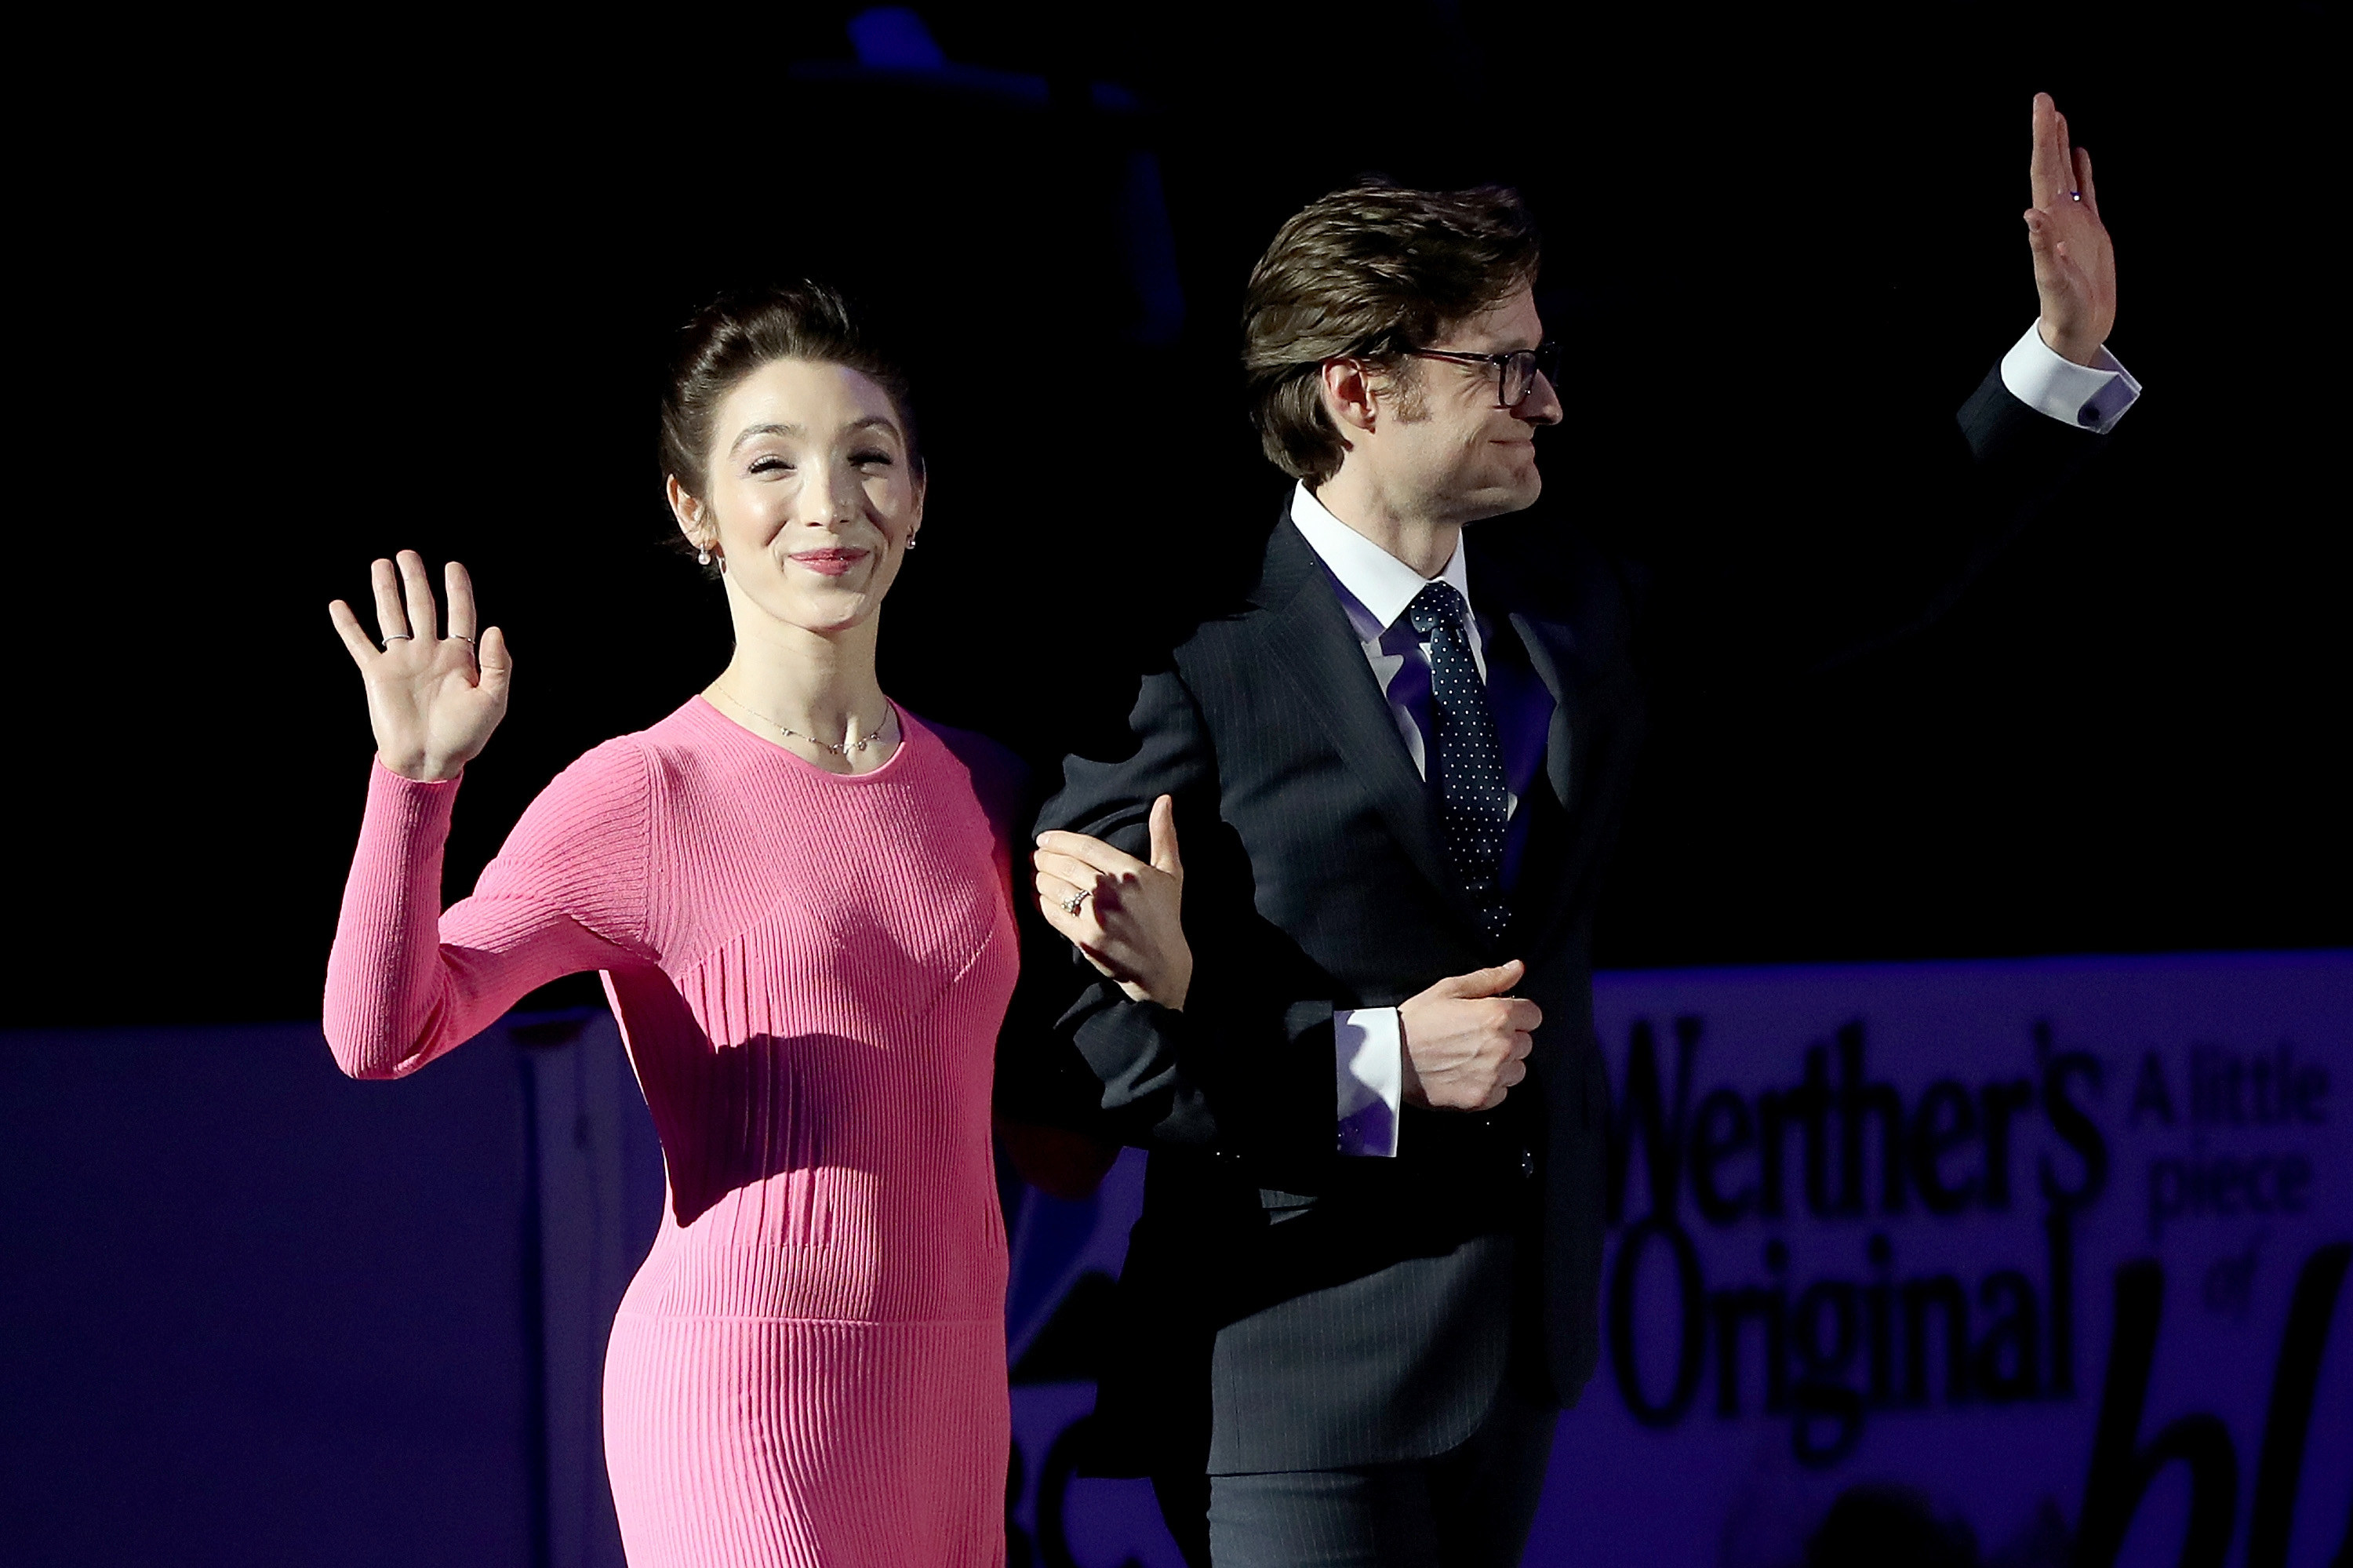 the two, in a suit and dress, waving to a crowd while on ice